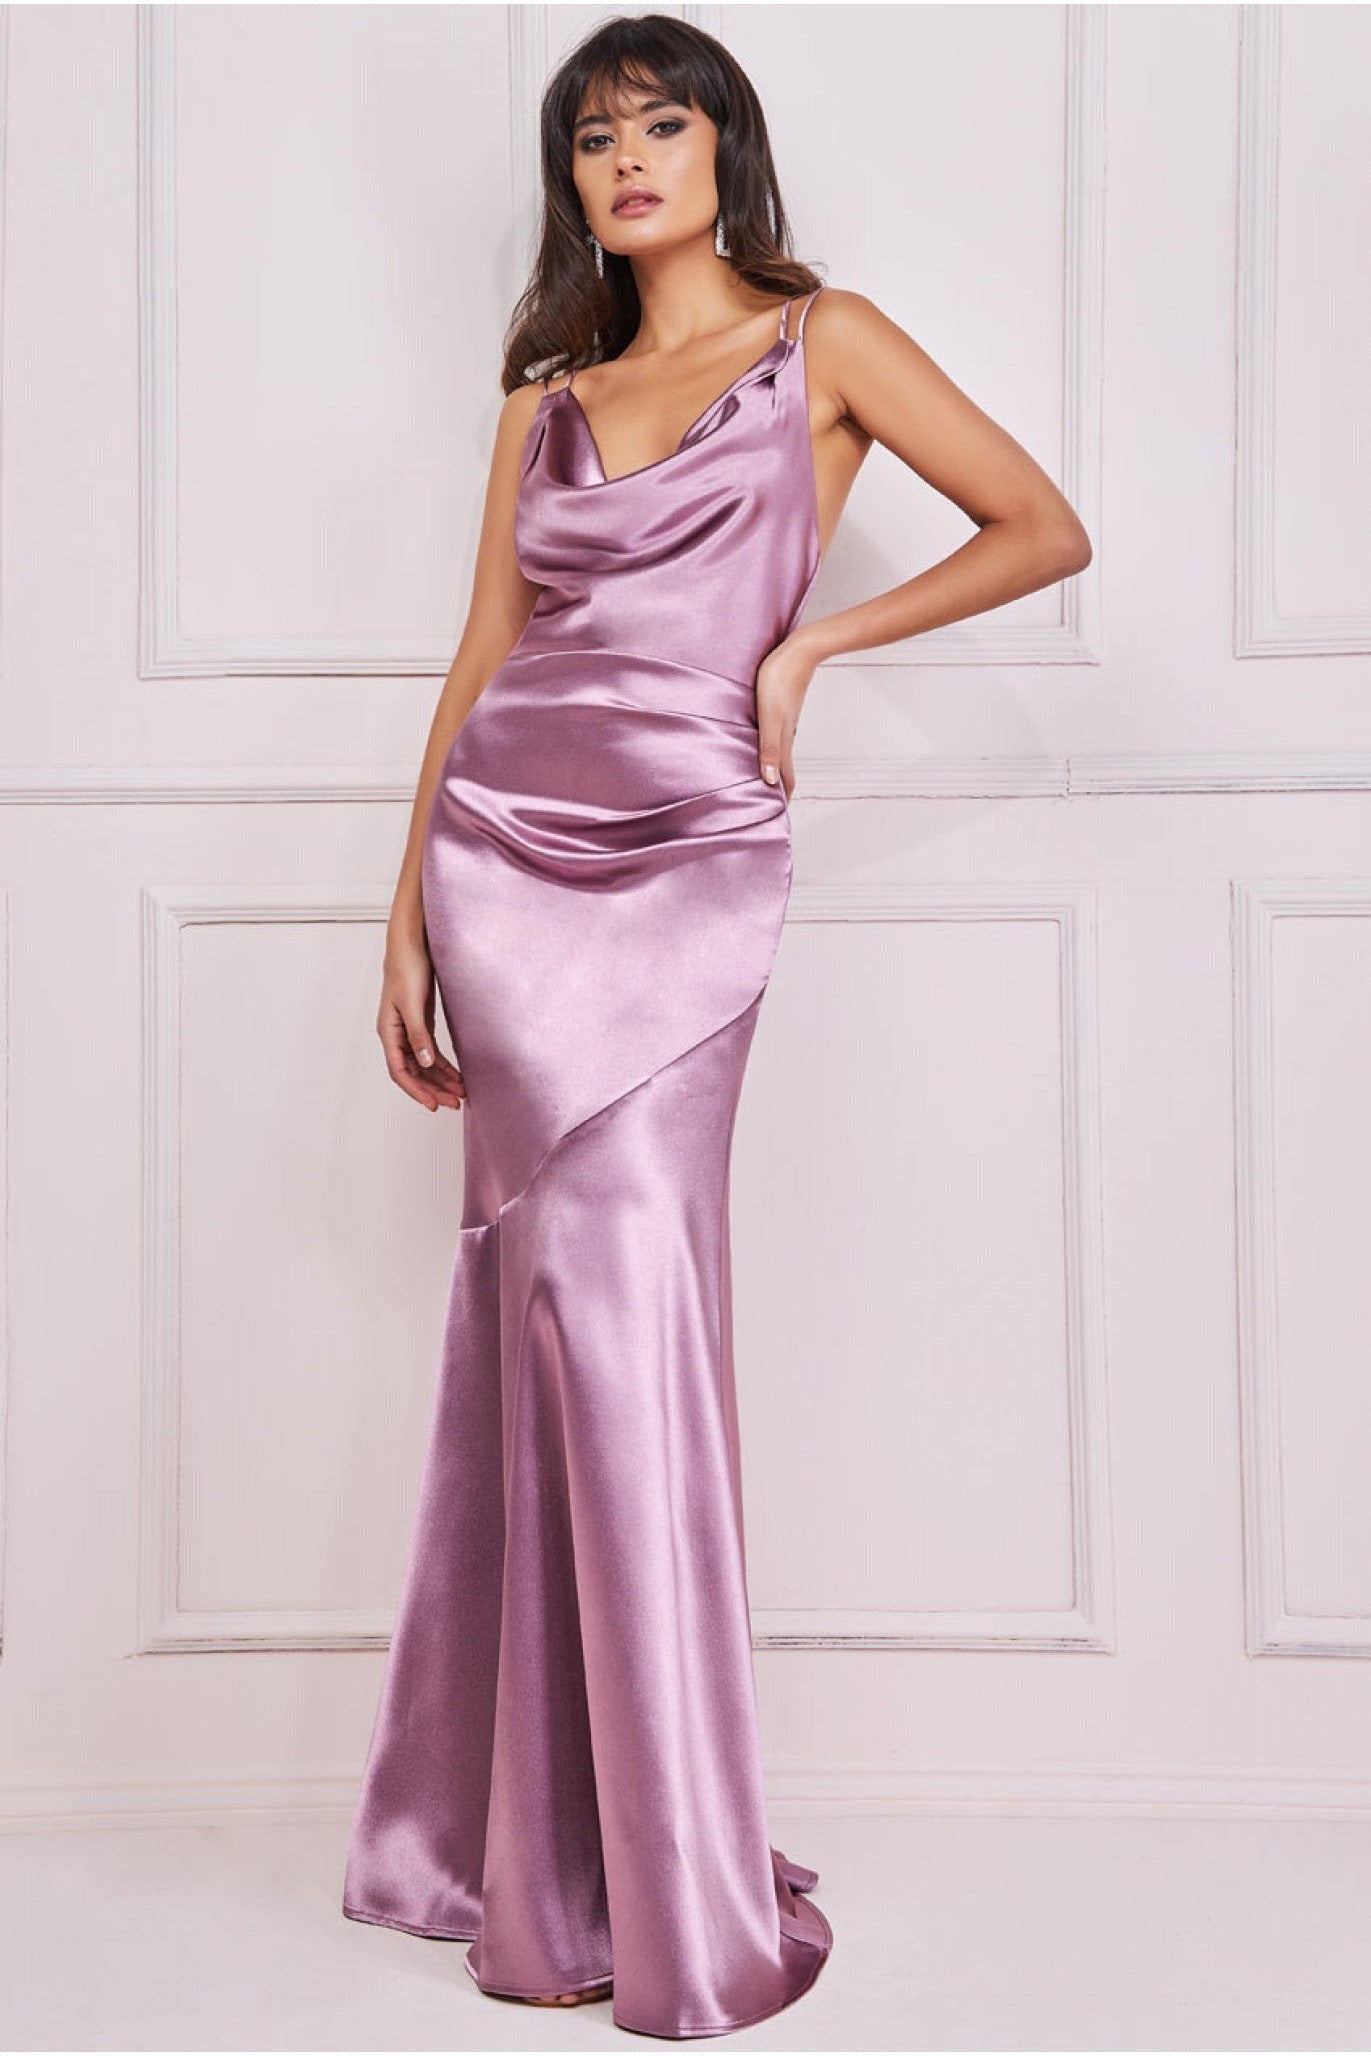 Cowl Neck With Strappy Back Satin Maxi - Blush DR2113